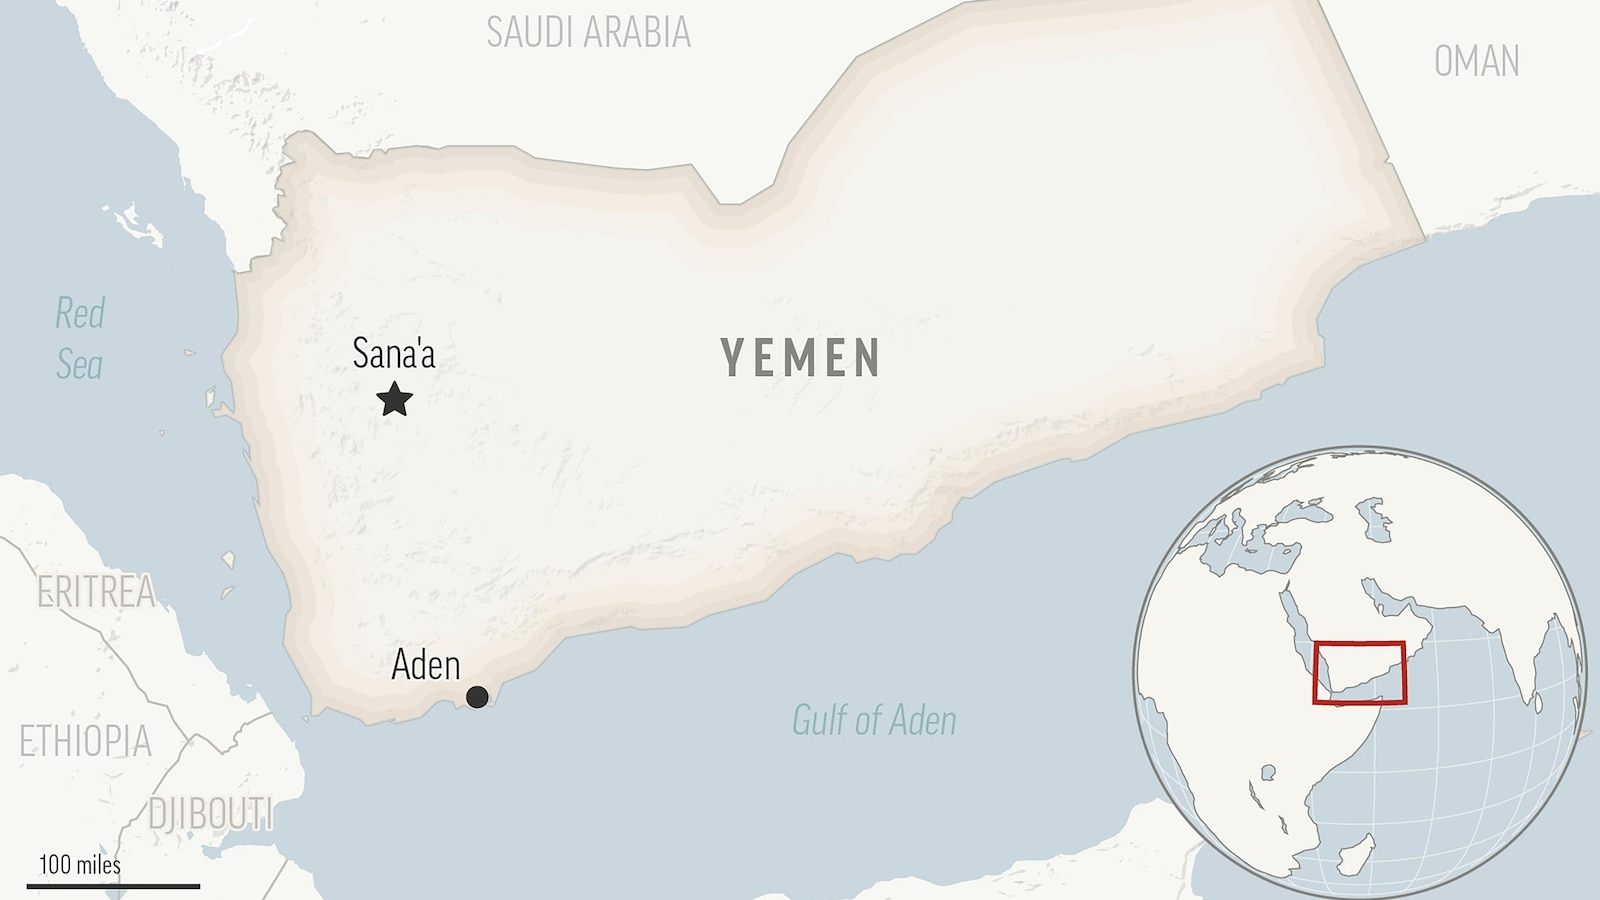 Yemen's Houthi rebels launch a missile that hits an oil tanker in the Red Sea, US military says